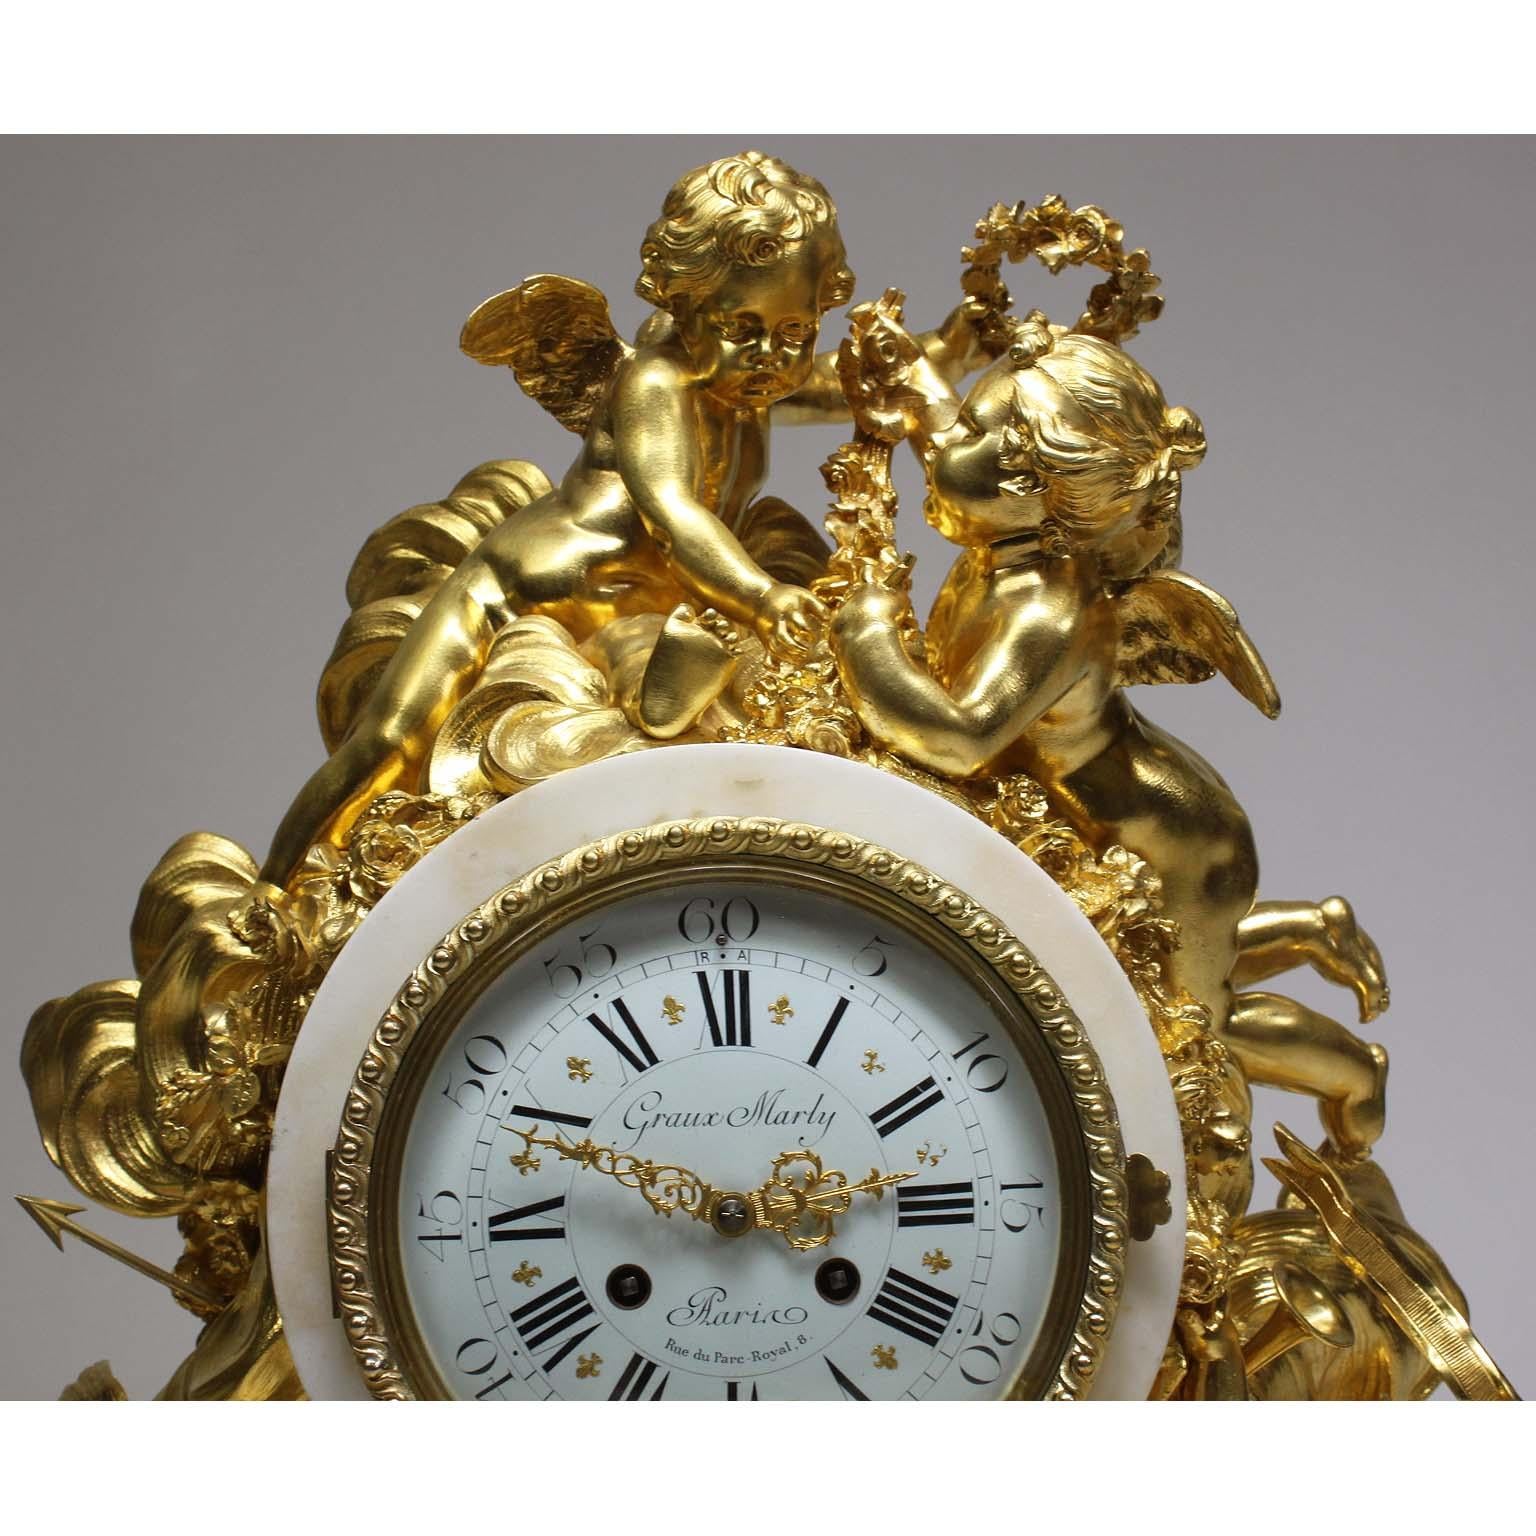 An Important and Palatial French Louis XV Style 19th Century Gilt-Bronze and White Marble Cherub Mantel Clock, attributed to Alfred-Emmanuel-Louis Beurdeley, the casting and gilding by Graux-Marly, Paris, the movement by P. Marti et Cie. The large